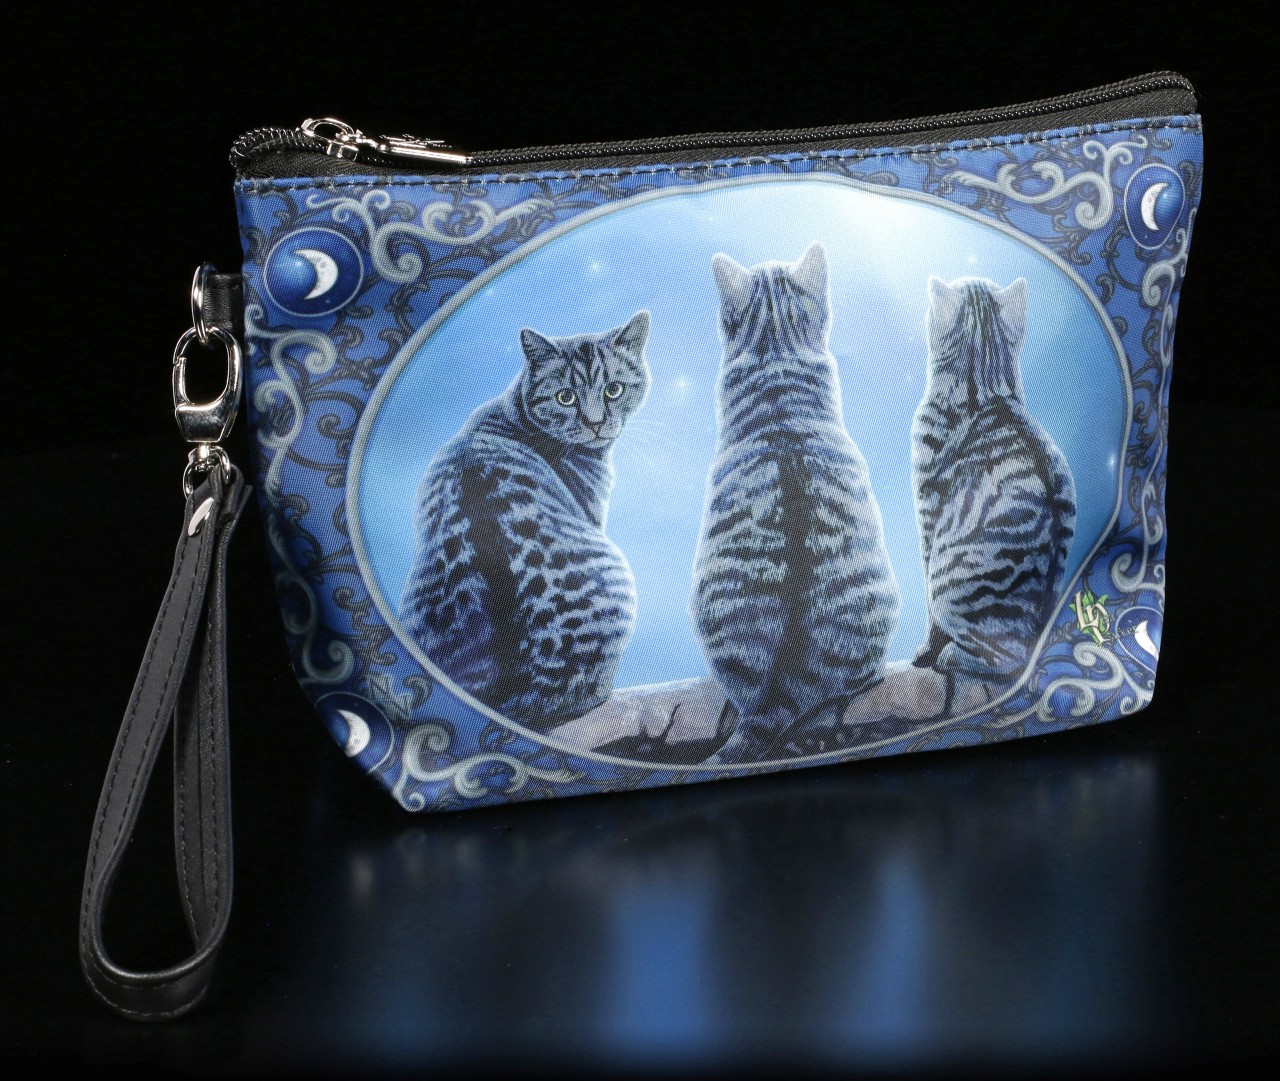 Toilet Bag with Cats - Wish Upon A Star